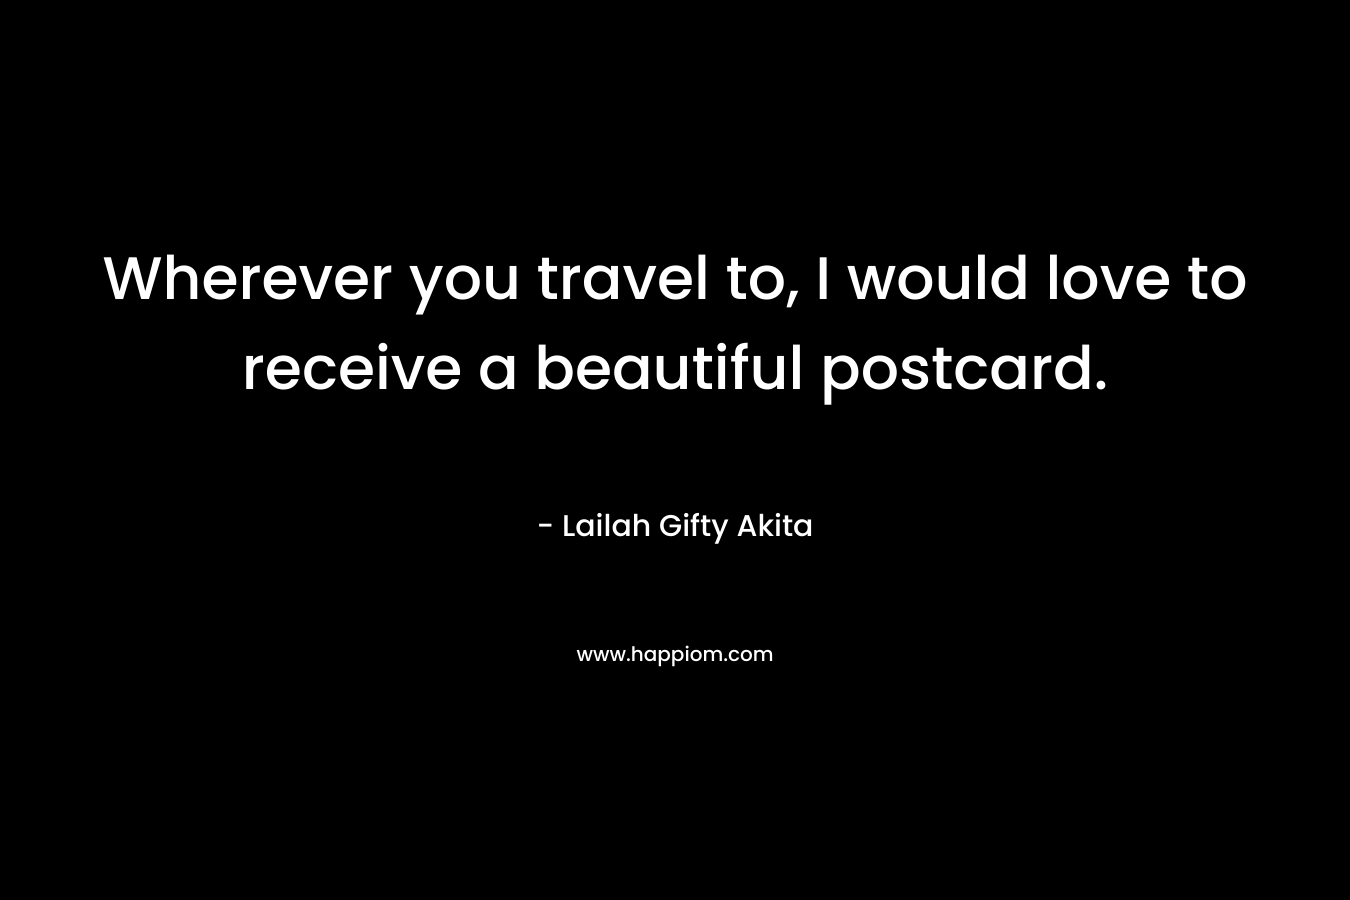 Wherever you travel to, I would love to receive a beautiful postcard. – Lailah Gifty Akita